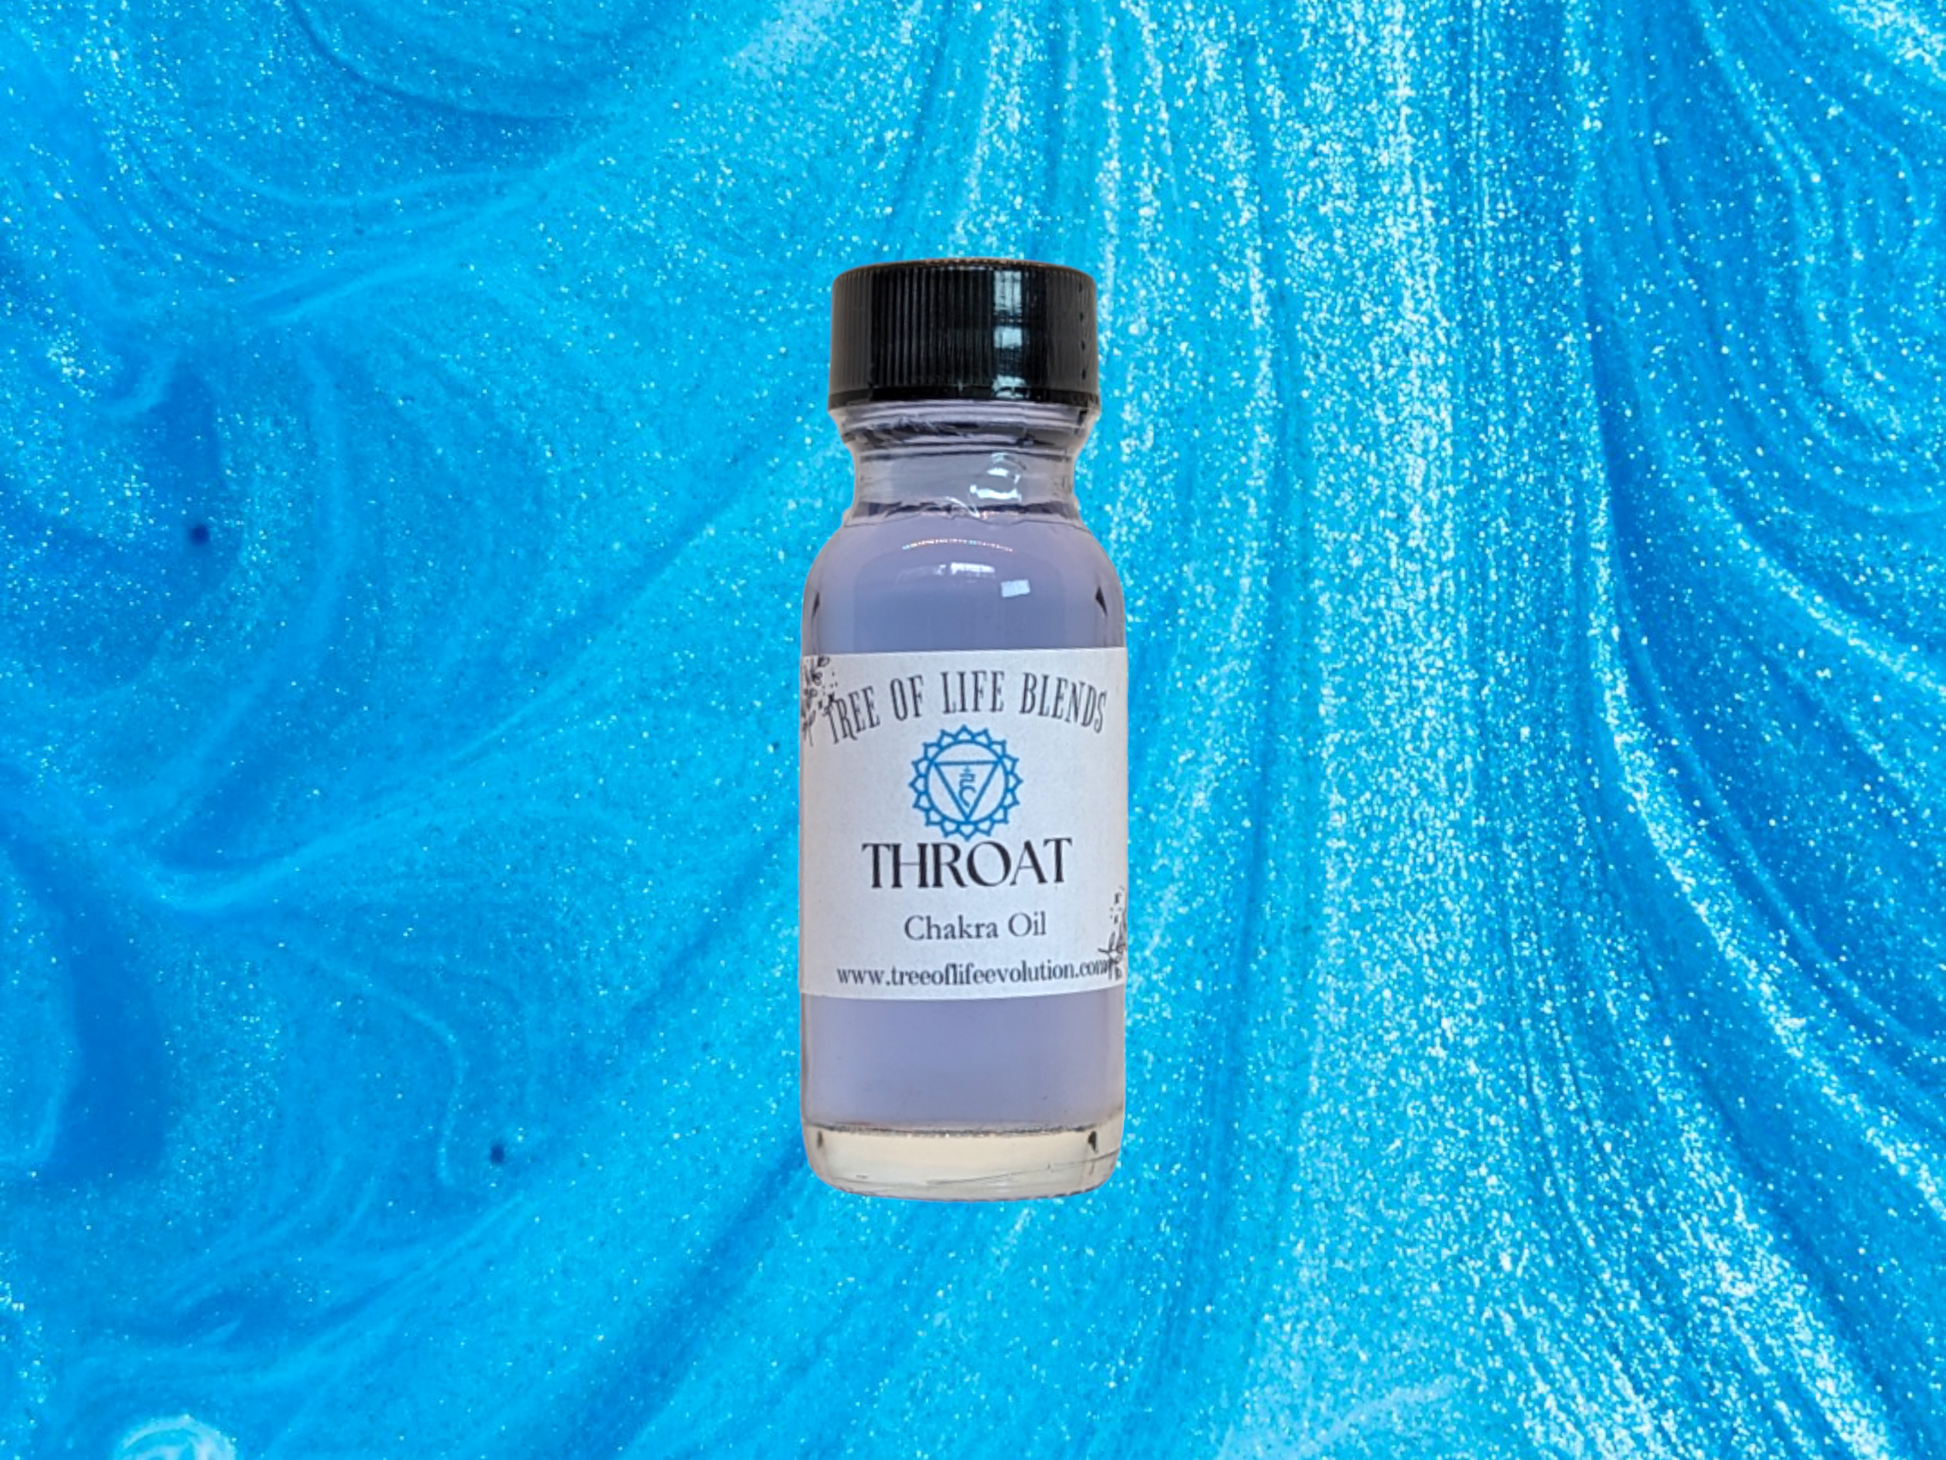 Throat chakra oil from Tree of Life Evolution on blue background